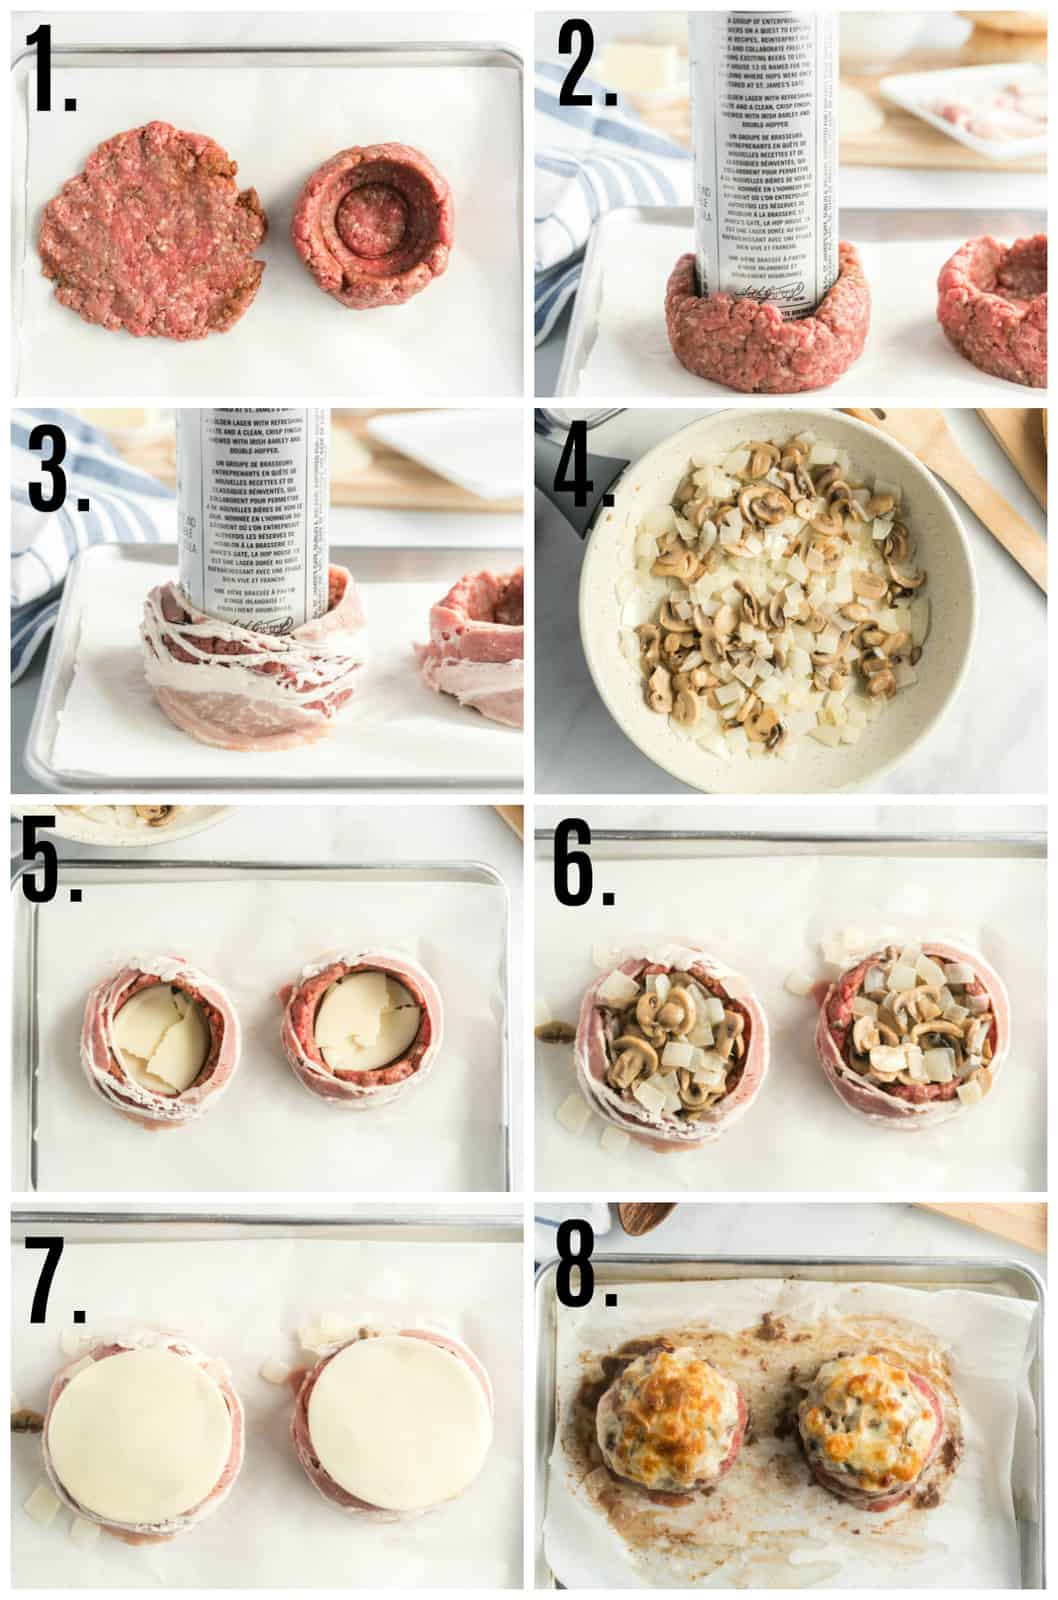 Step by step photos on how to make beer can burgers